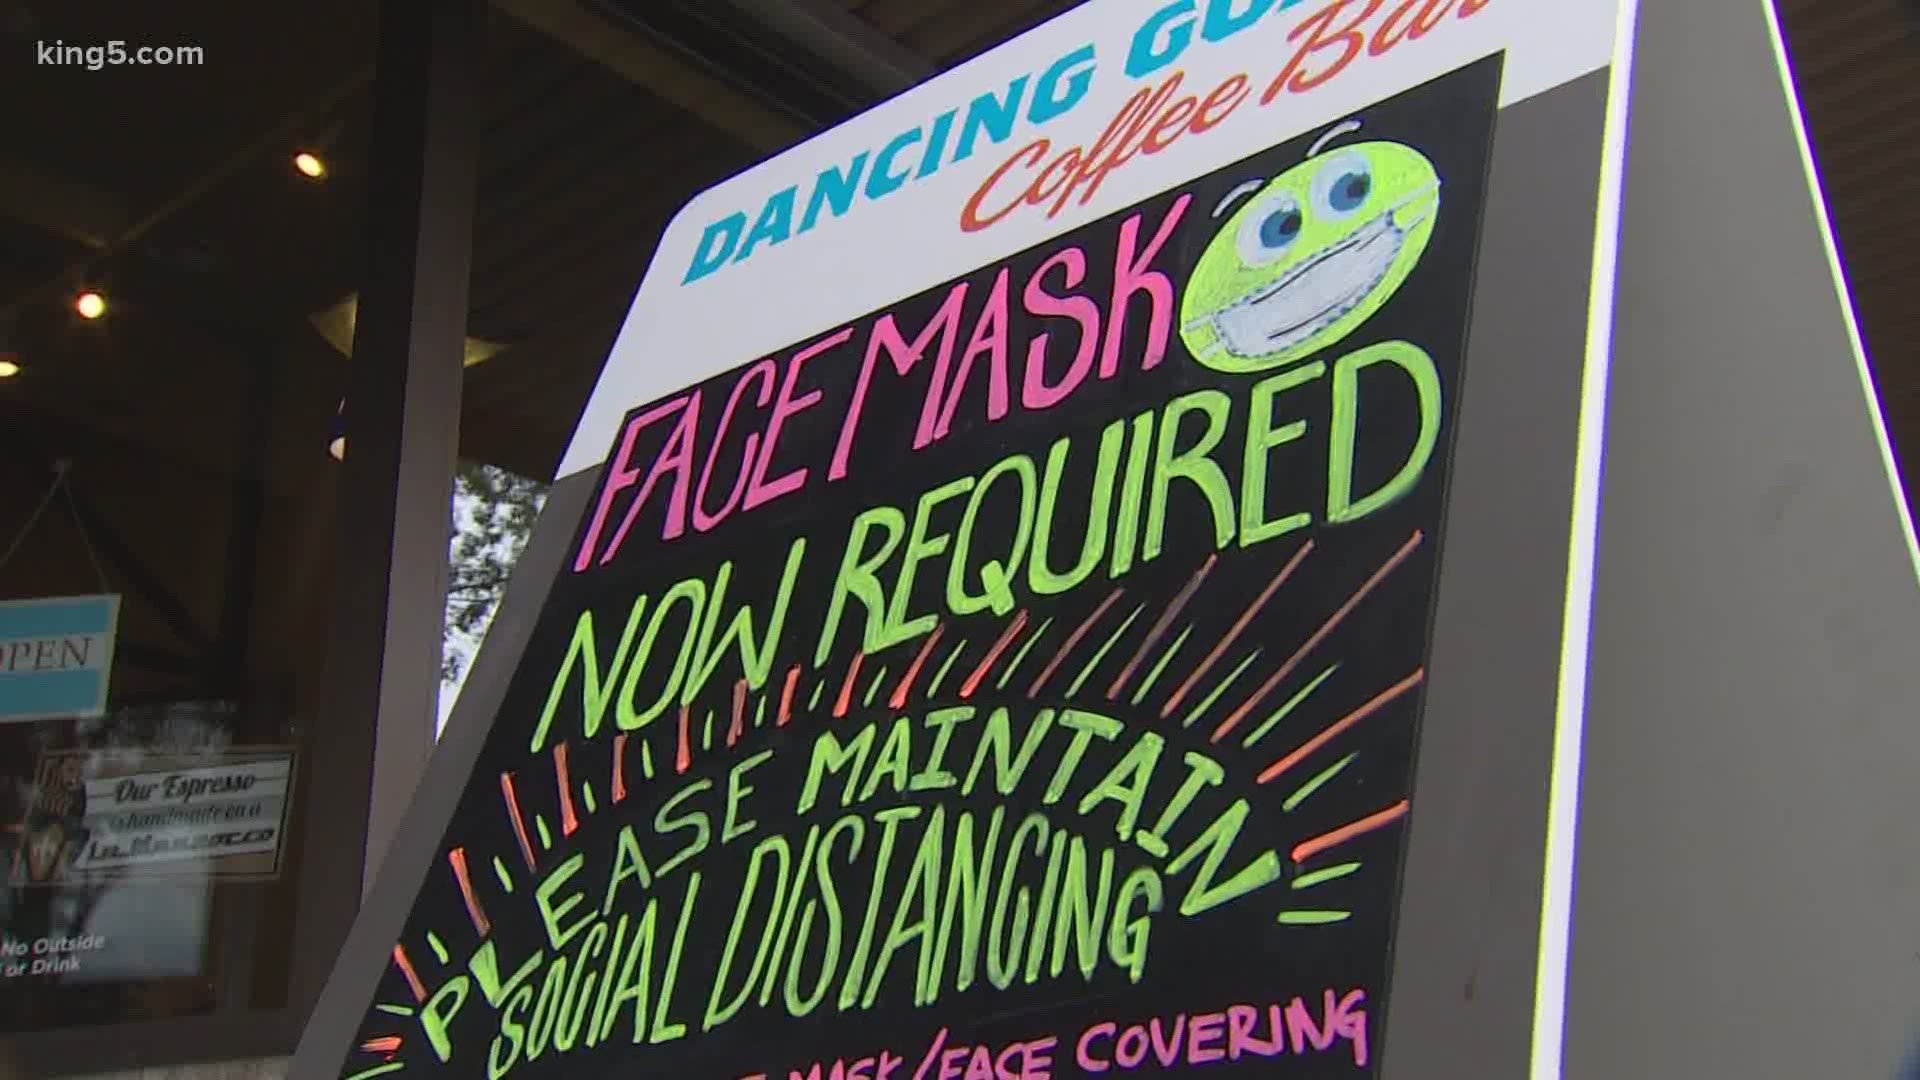 Gov. Jay Inslee signed a mandate that states you cannot be served at a business if you are not wearing a mask. Businesses could be fined if they aren't in compliance